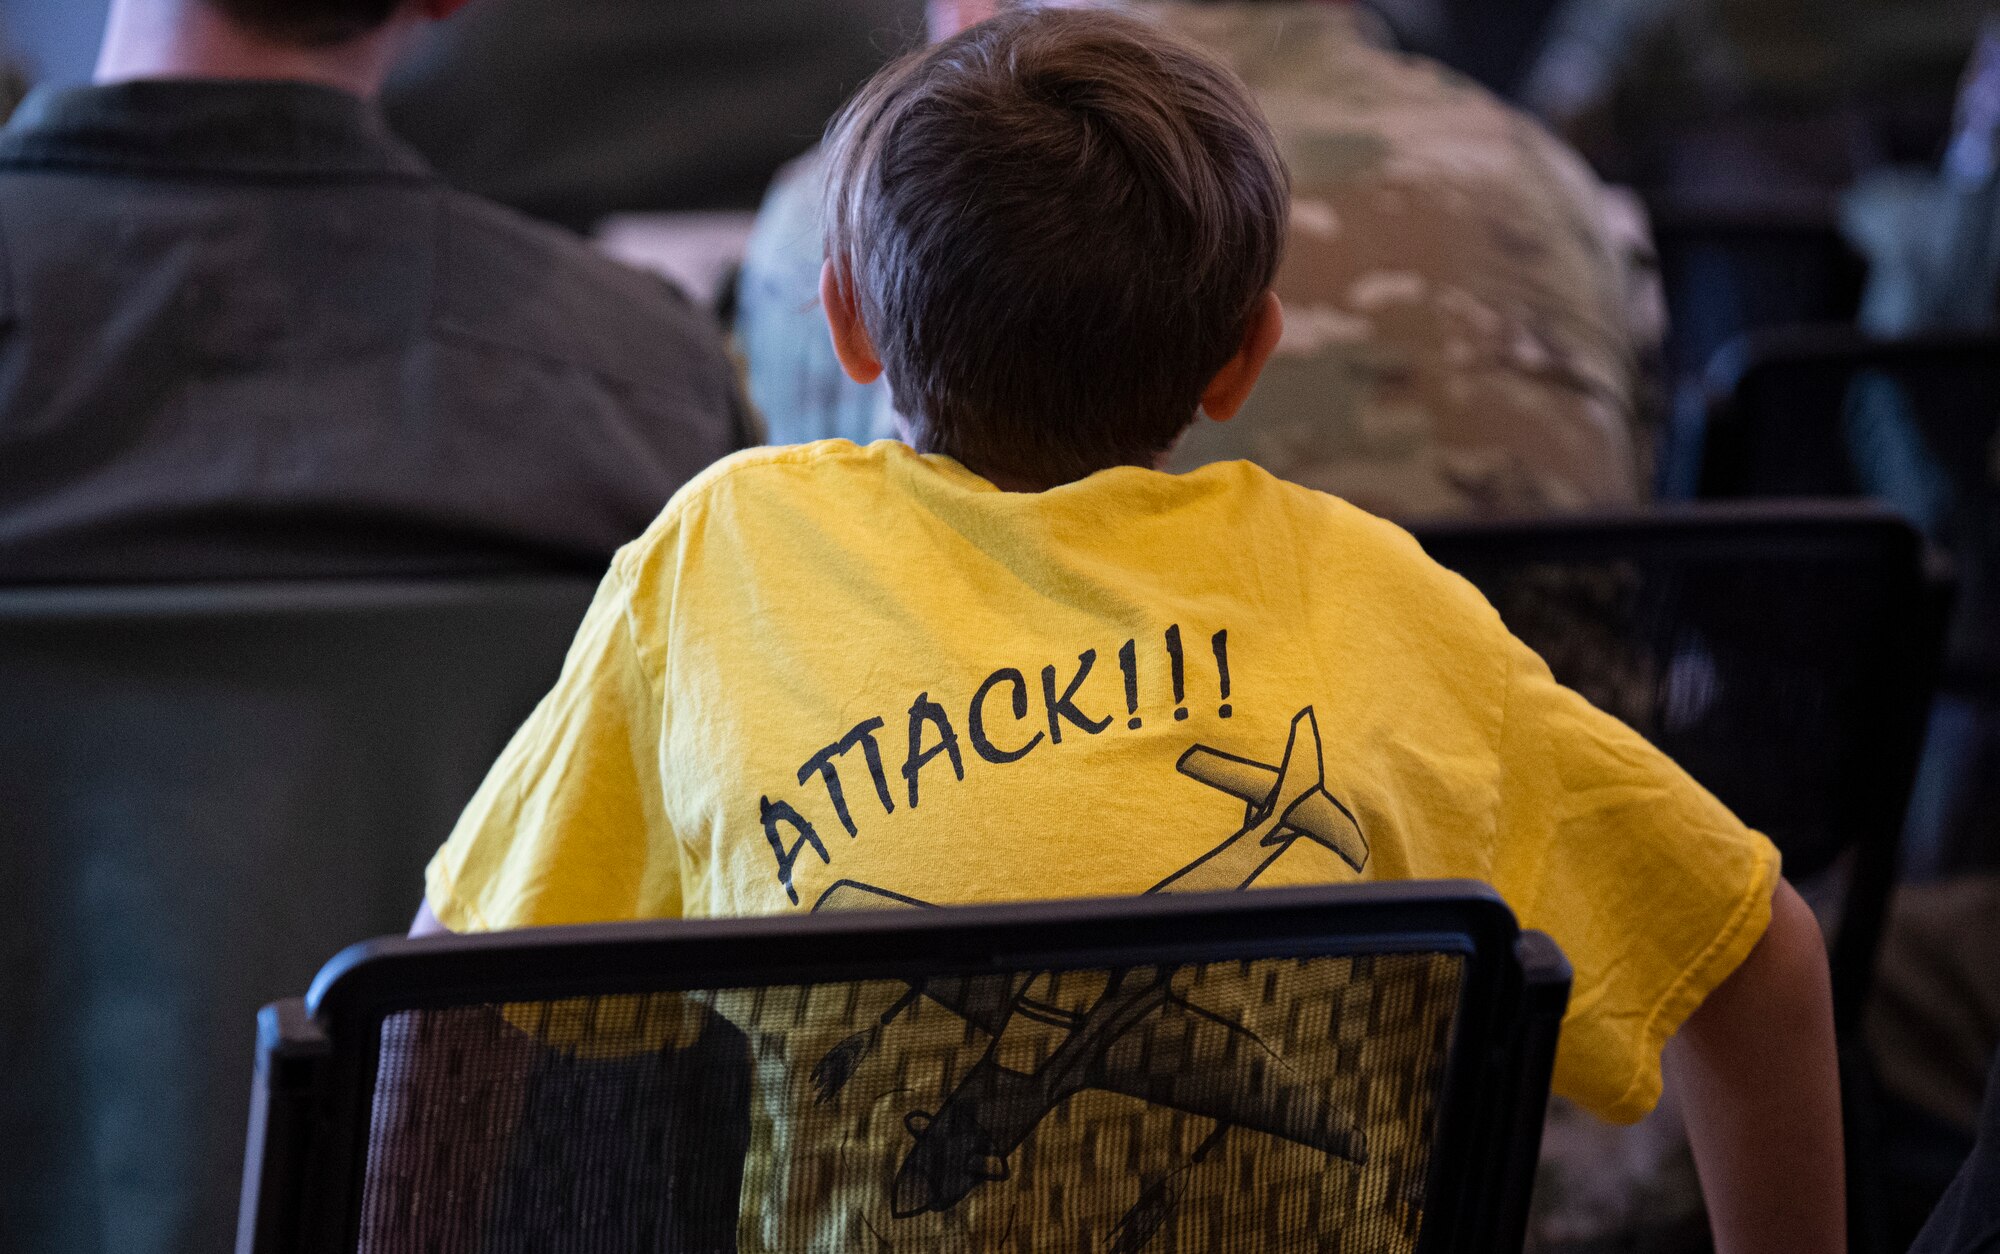 Members of the 81st Fighter Squadron gather with their friends and families at Moody Air Force Base, Georgia, Dec. 5, 2022, in honor of the deactivation ceremony for their squadron. Children in attendance of the ceremony wore shirts that read the 81st FS motto, “ATTACK!” ” (U.S. Air Force photo by Airman 1st Class Whitney Gillespie)